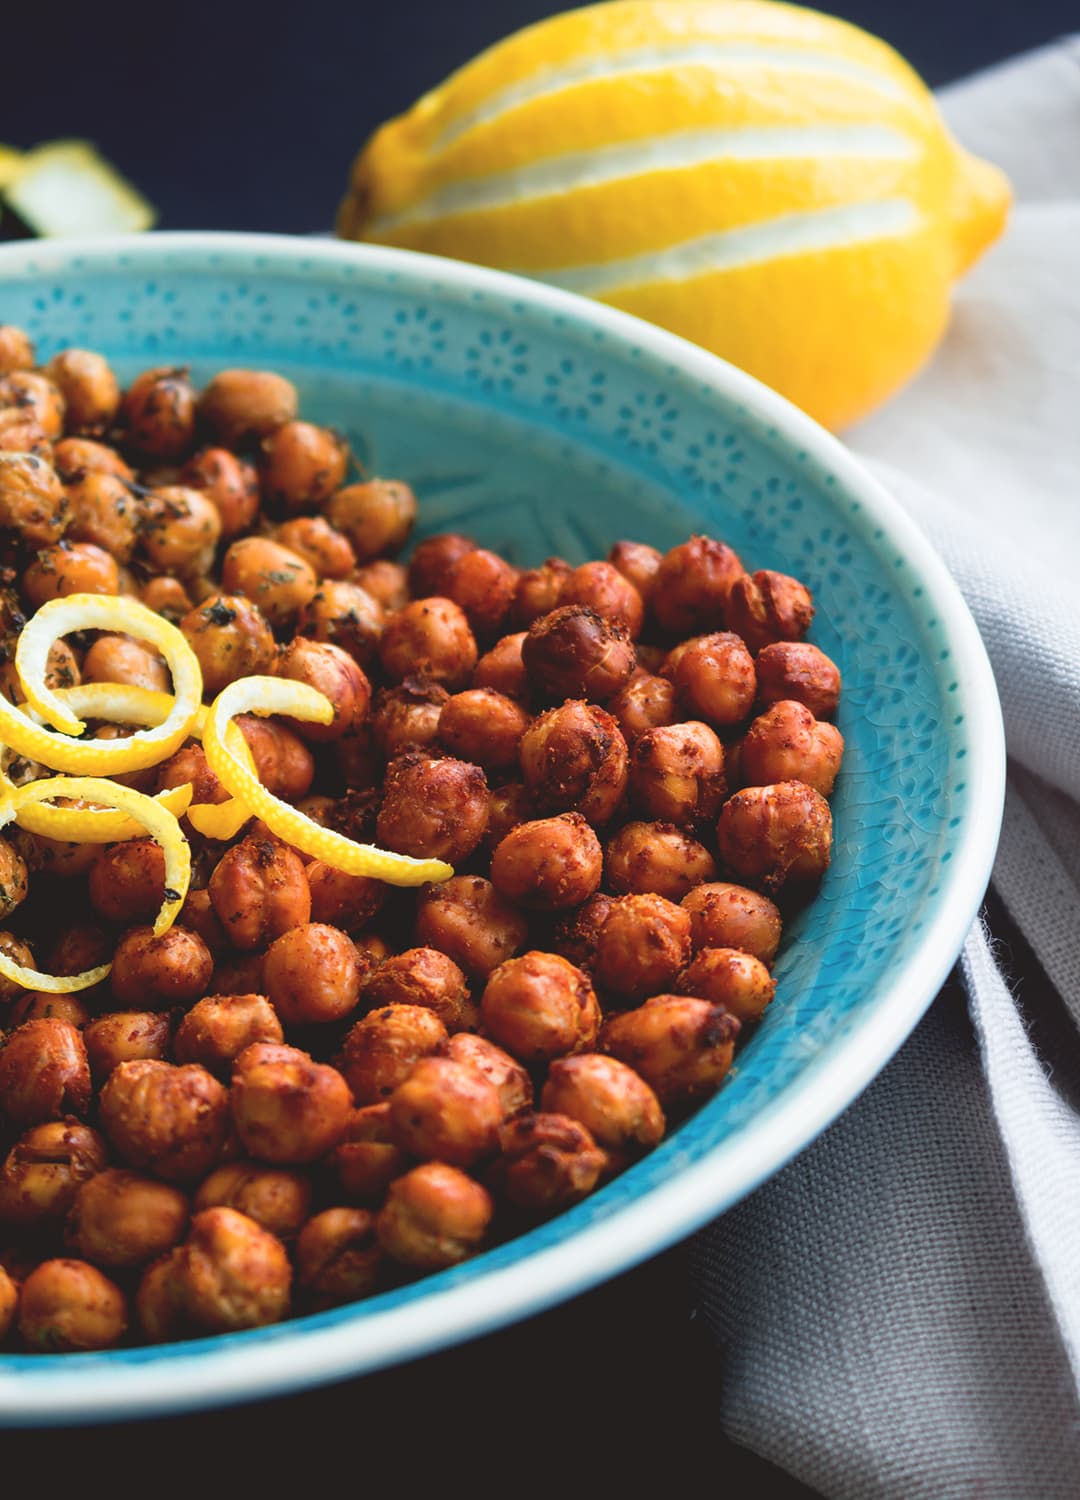 Crunchy Chickpeas 2 ways - healthy snack full of protein! You won't believe how easy it is to make! Full of amazing nurturing ingredients, you'll never eat store bought salty snacks again! Vegan, GF | thehealthfulideas.com